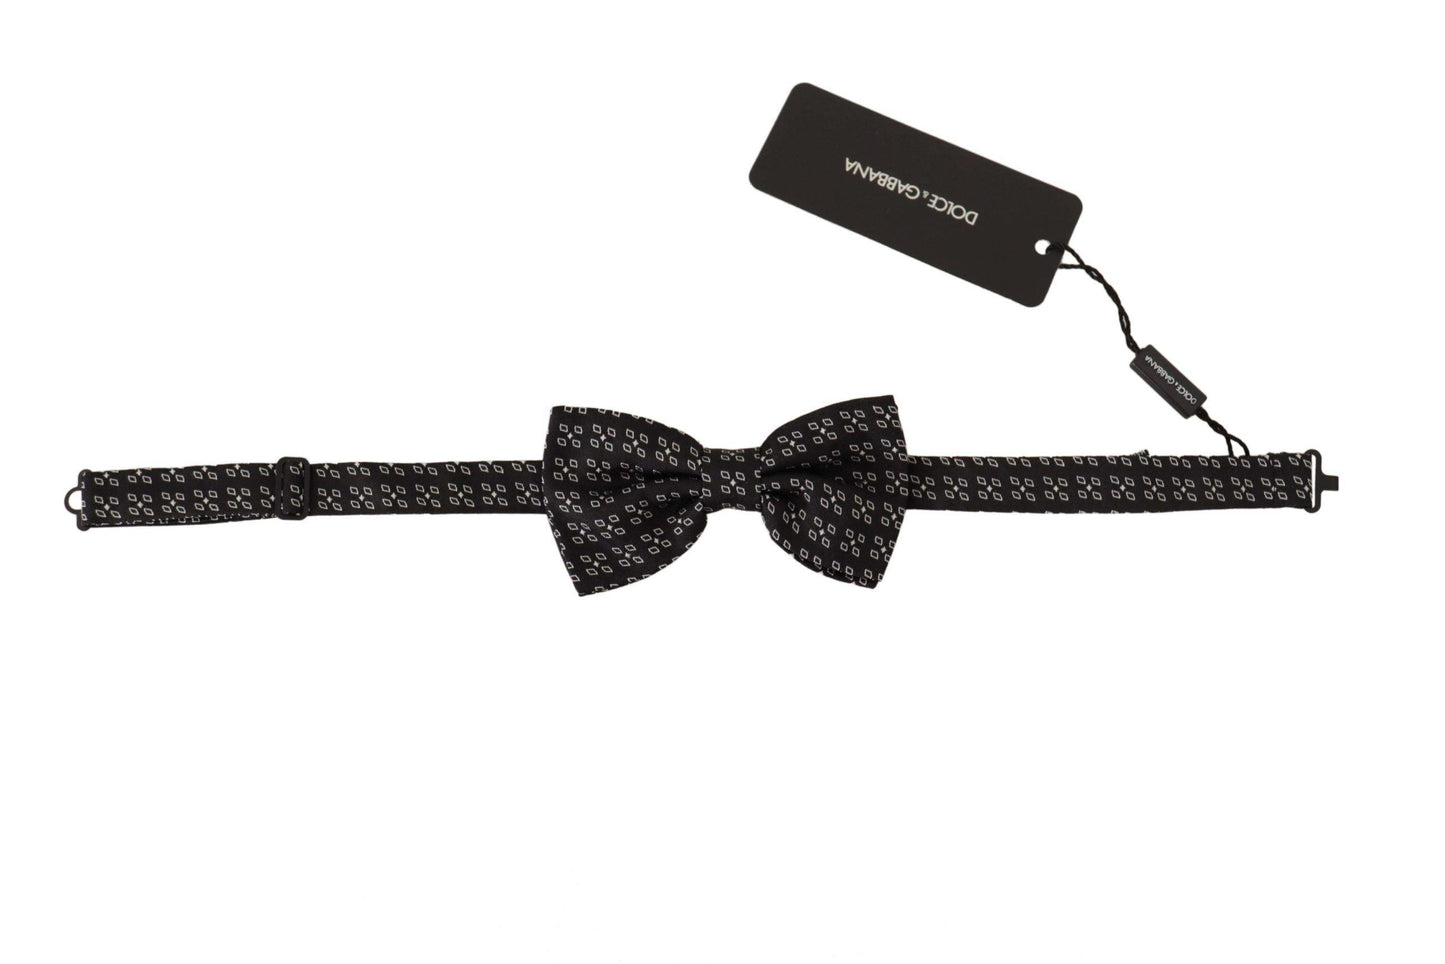 Dolce & Gabbana Black White Polka Dot 100% Silk Neck Papillon Tie - Designed by Dolce & Gabbana Available to Buy at a Discounted Price on Moon Behind The Hill Online Designer Discount Store